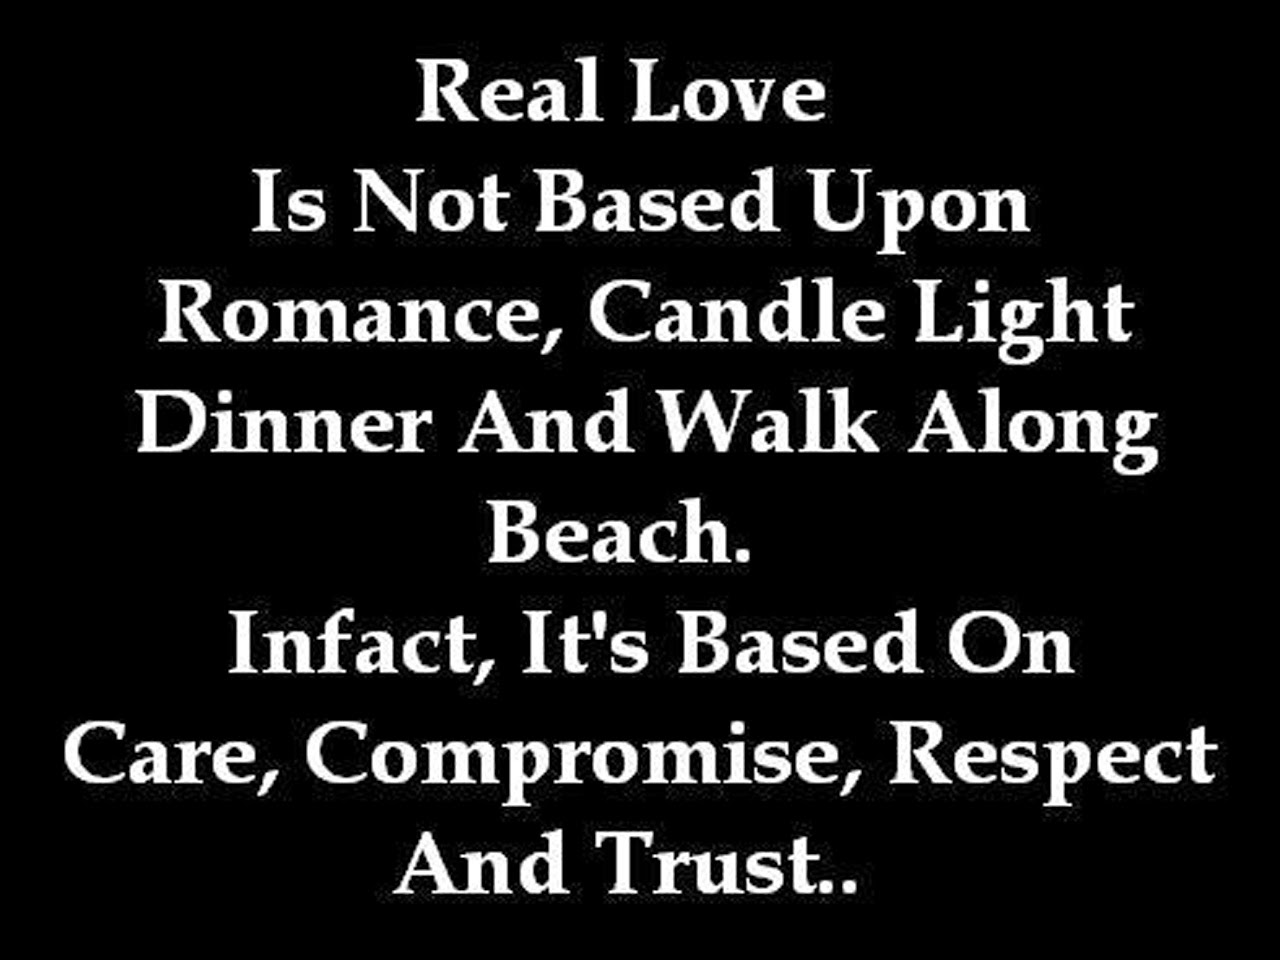 "Real love is not based upon romance candle light dinner